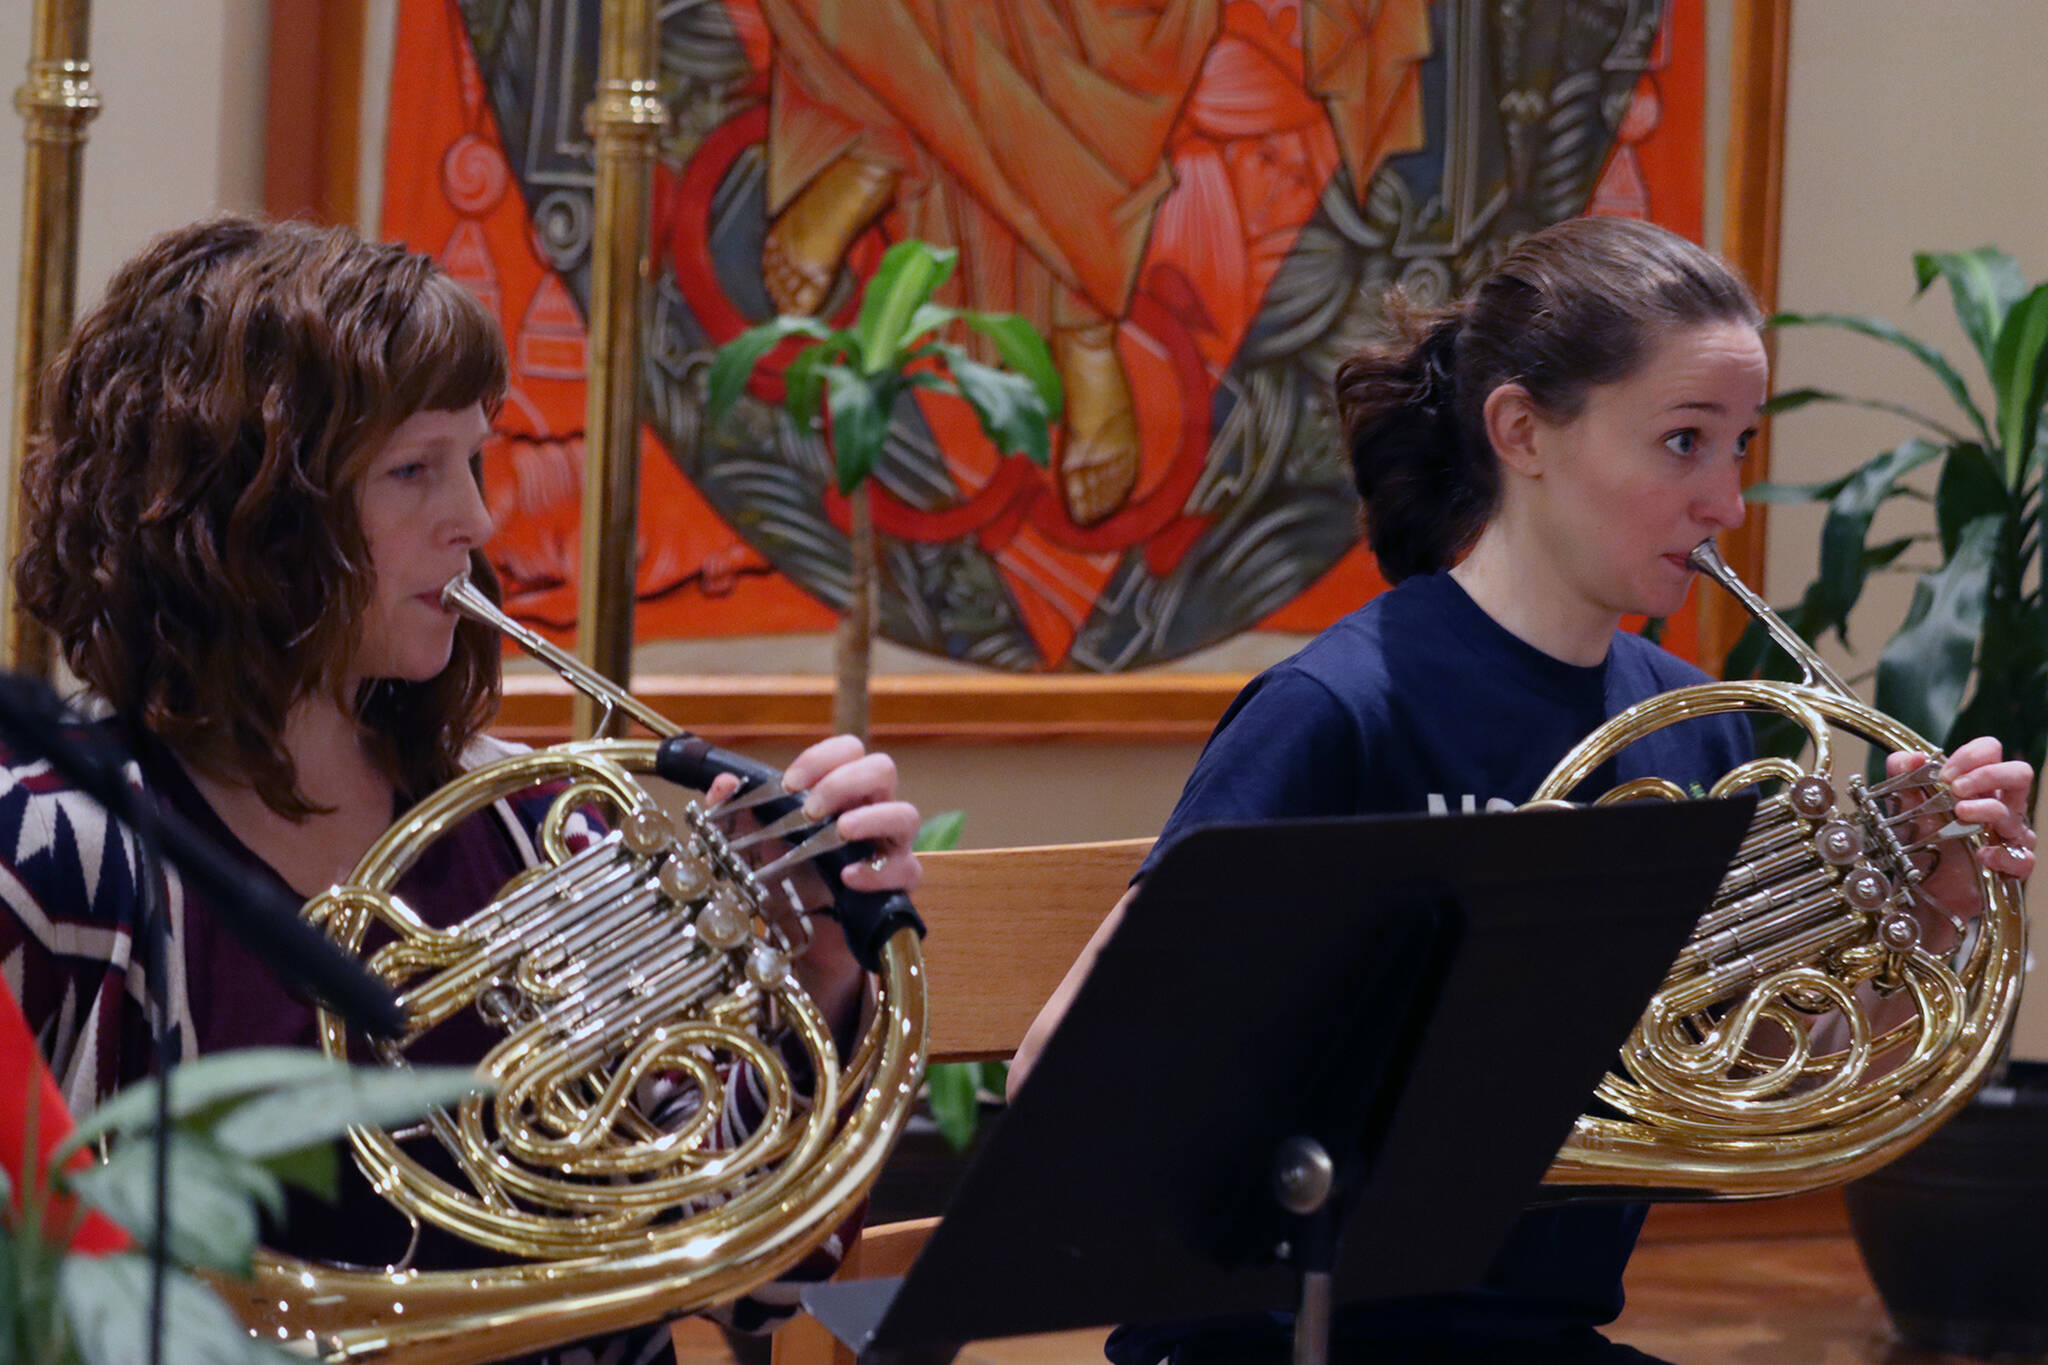 Jayne Berry and Taylor Young play french horns on Tuesday night during rehearsal for the Juneau Symphony’s return to in-person performances. (Ben Hohenstatt / Juneau Empire)